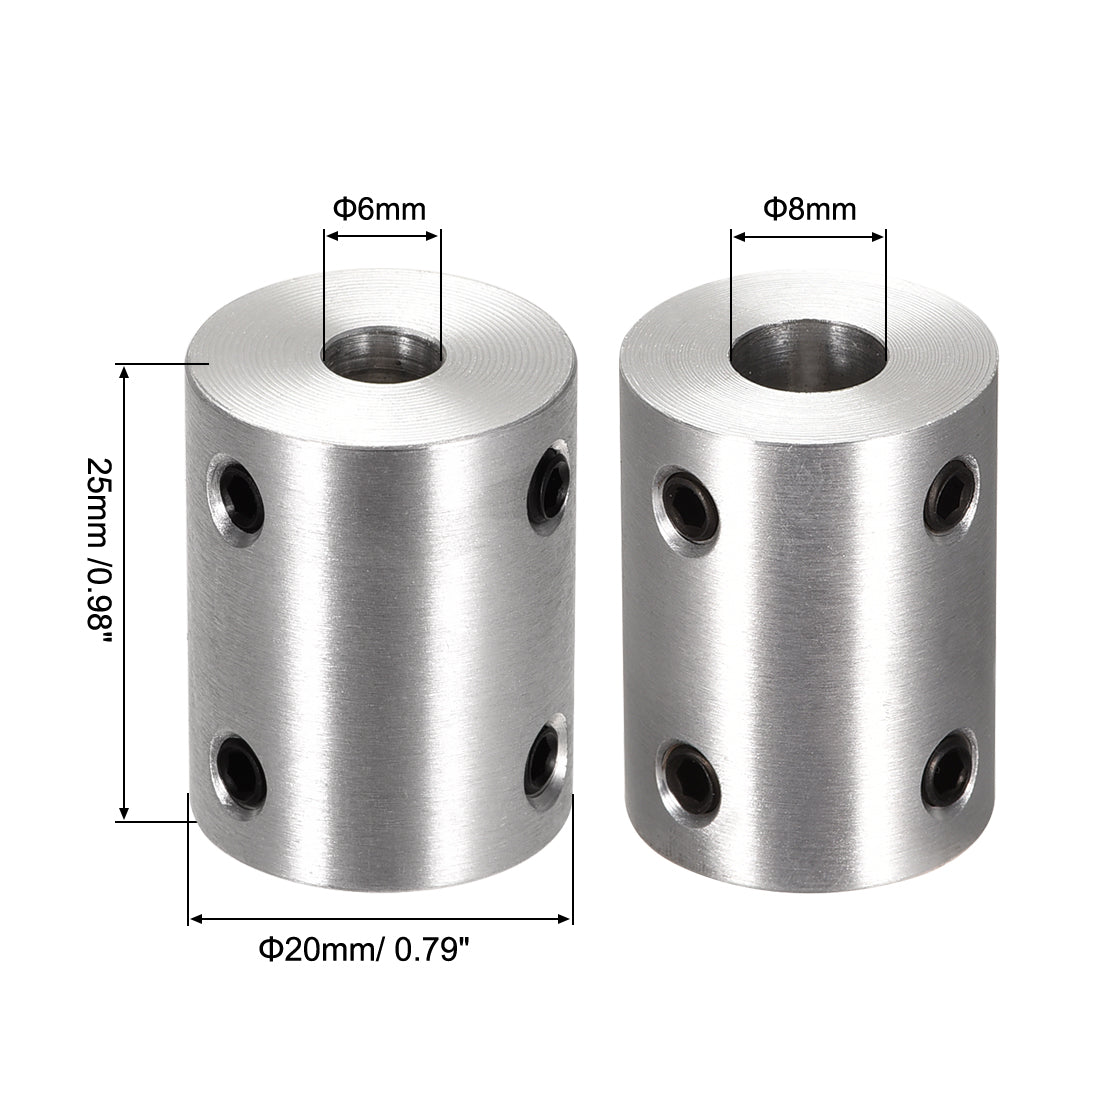 Uxcell Uxcell 10mm to 10mm Bore Rigid Coupling 25mm Length 20mm Diameter Aluminum Alloy Shaft Coupler Connector Silver